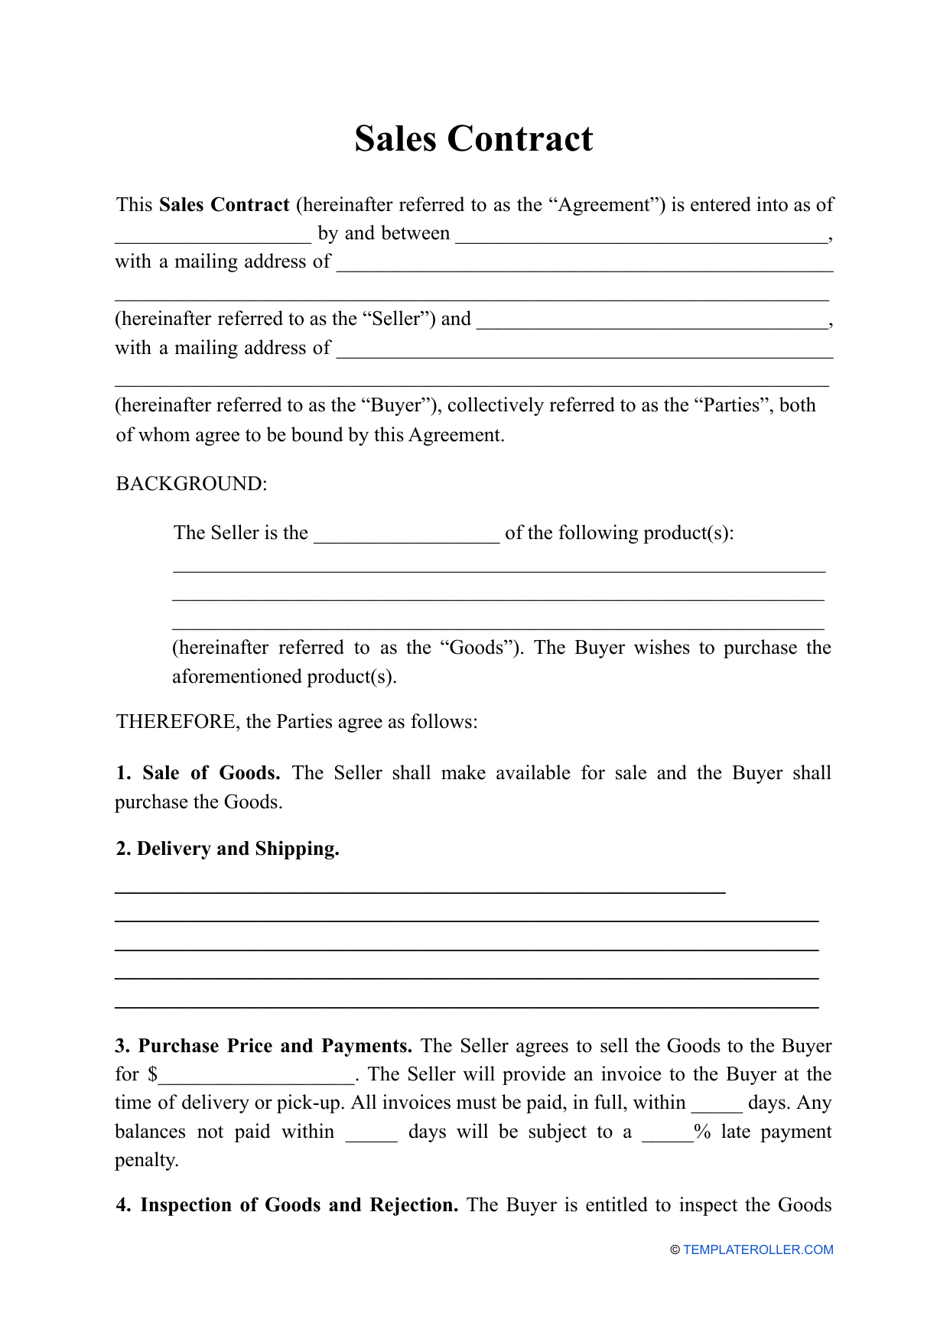 Sales Contract Template, Page 1